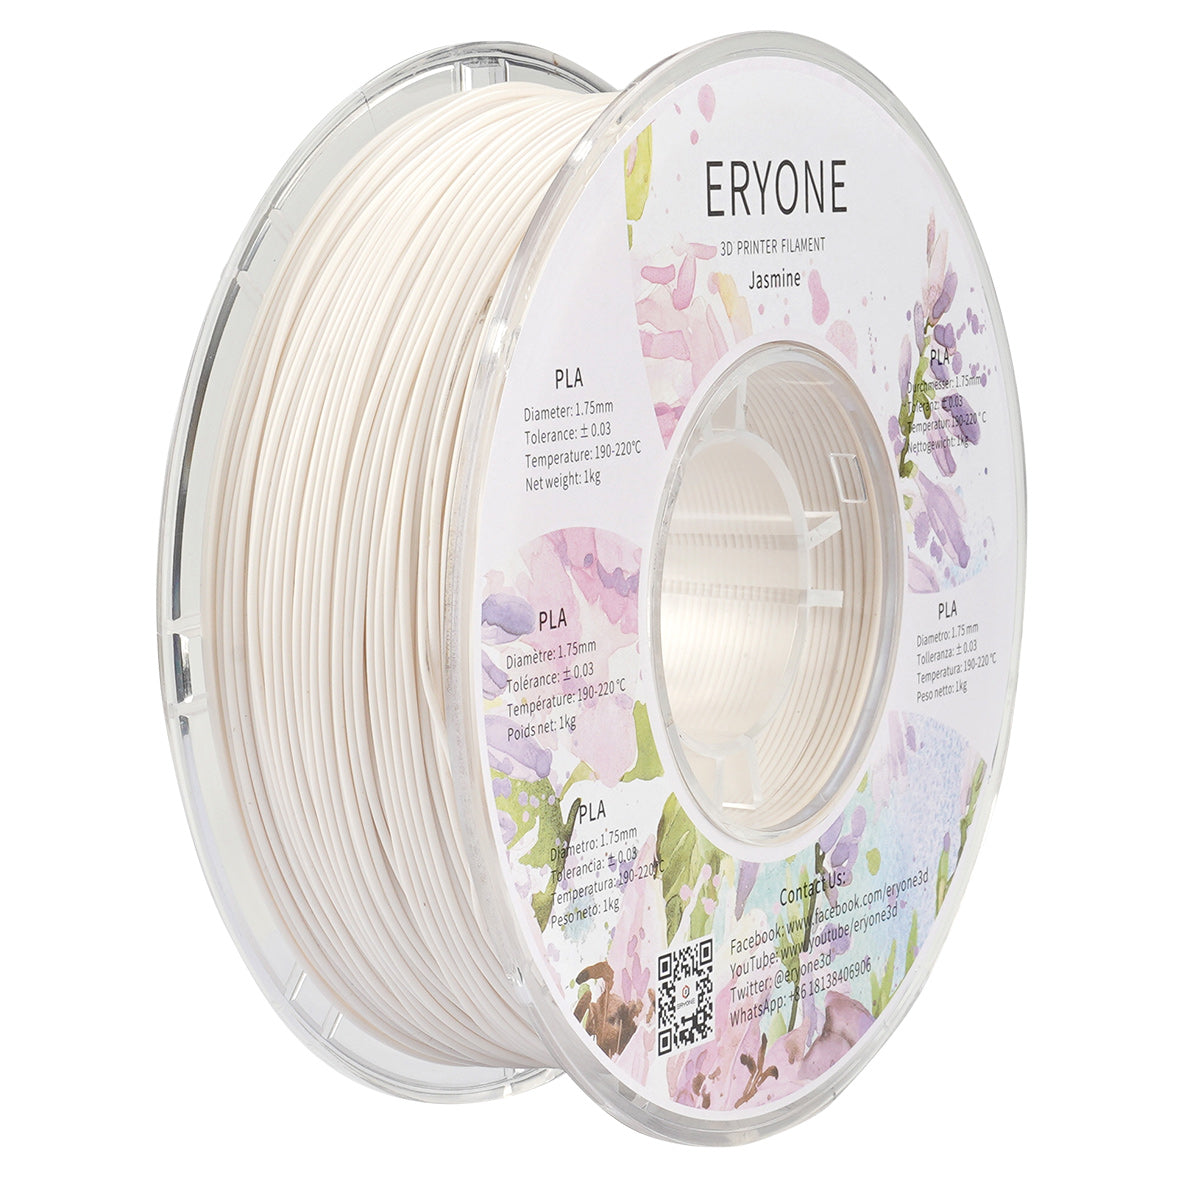 Love Filament-Flower and Fruit Scented Filament for Everyone by